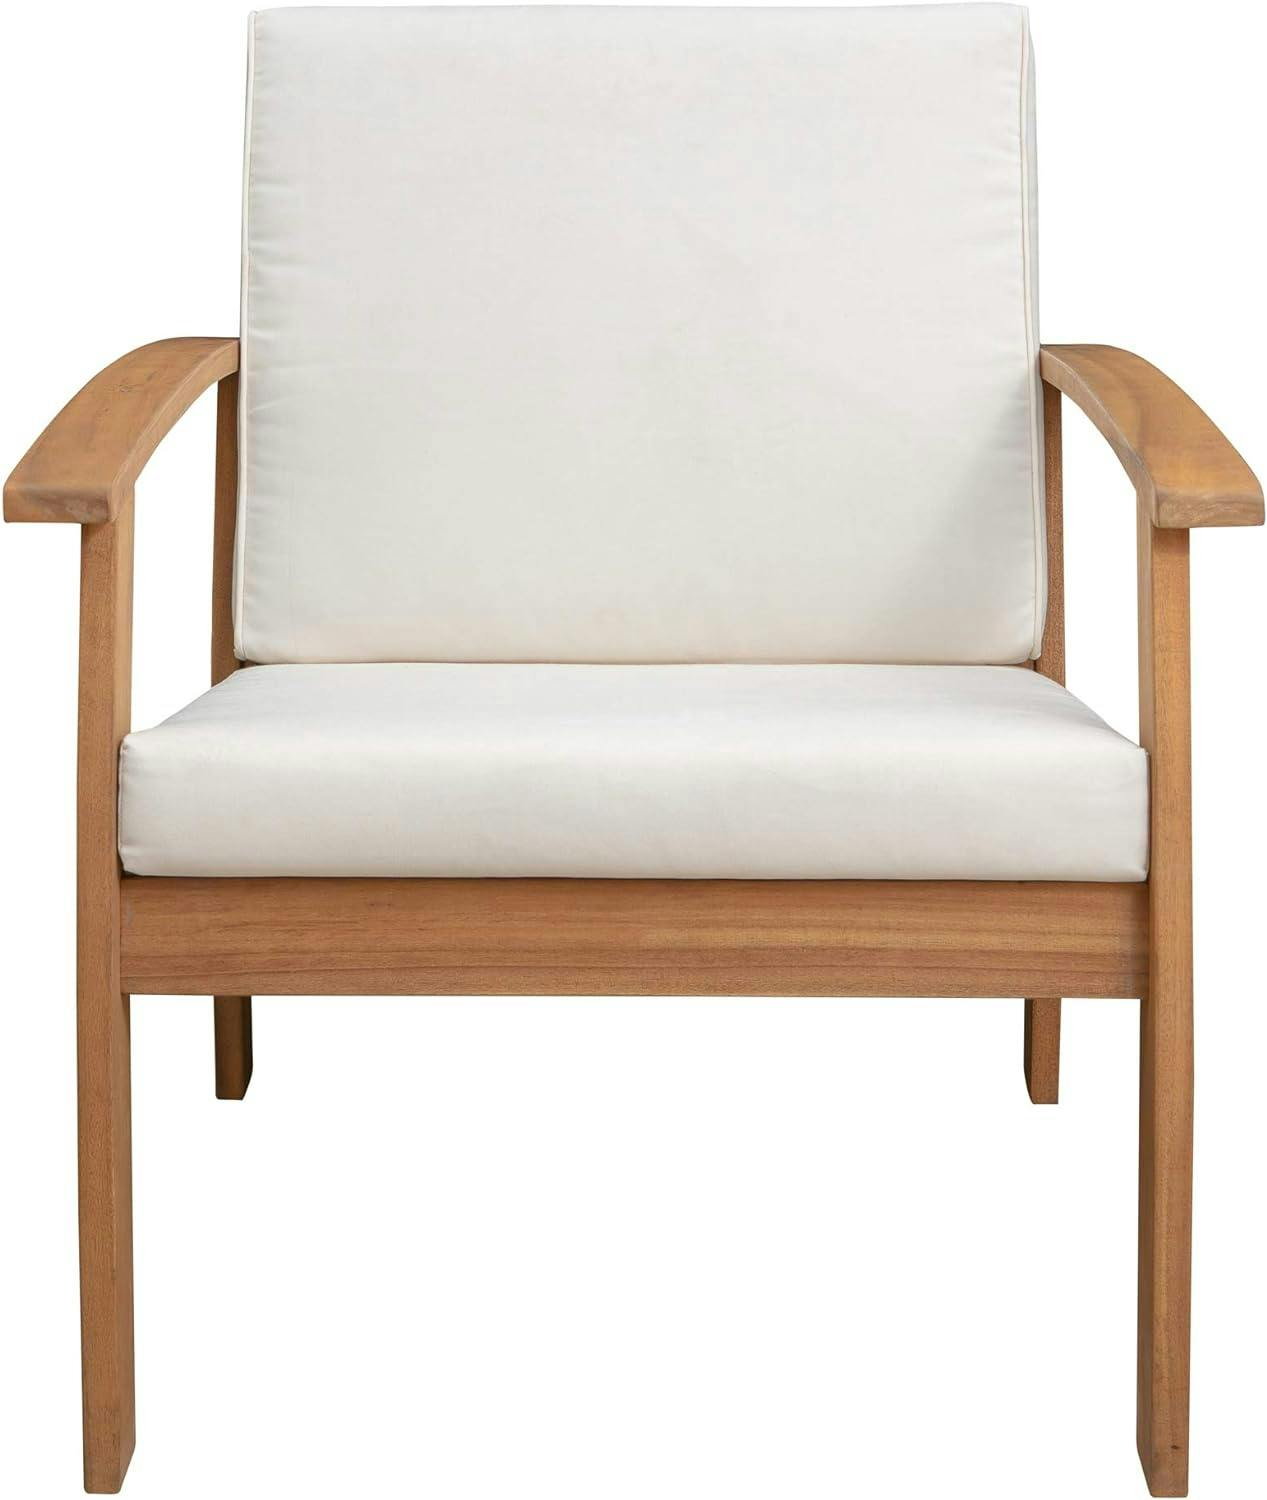 Scandinavian Midcentury Modern Solid Wood Lounge Chair with Cream Cushions